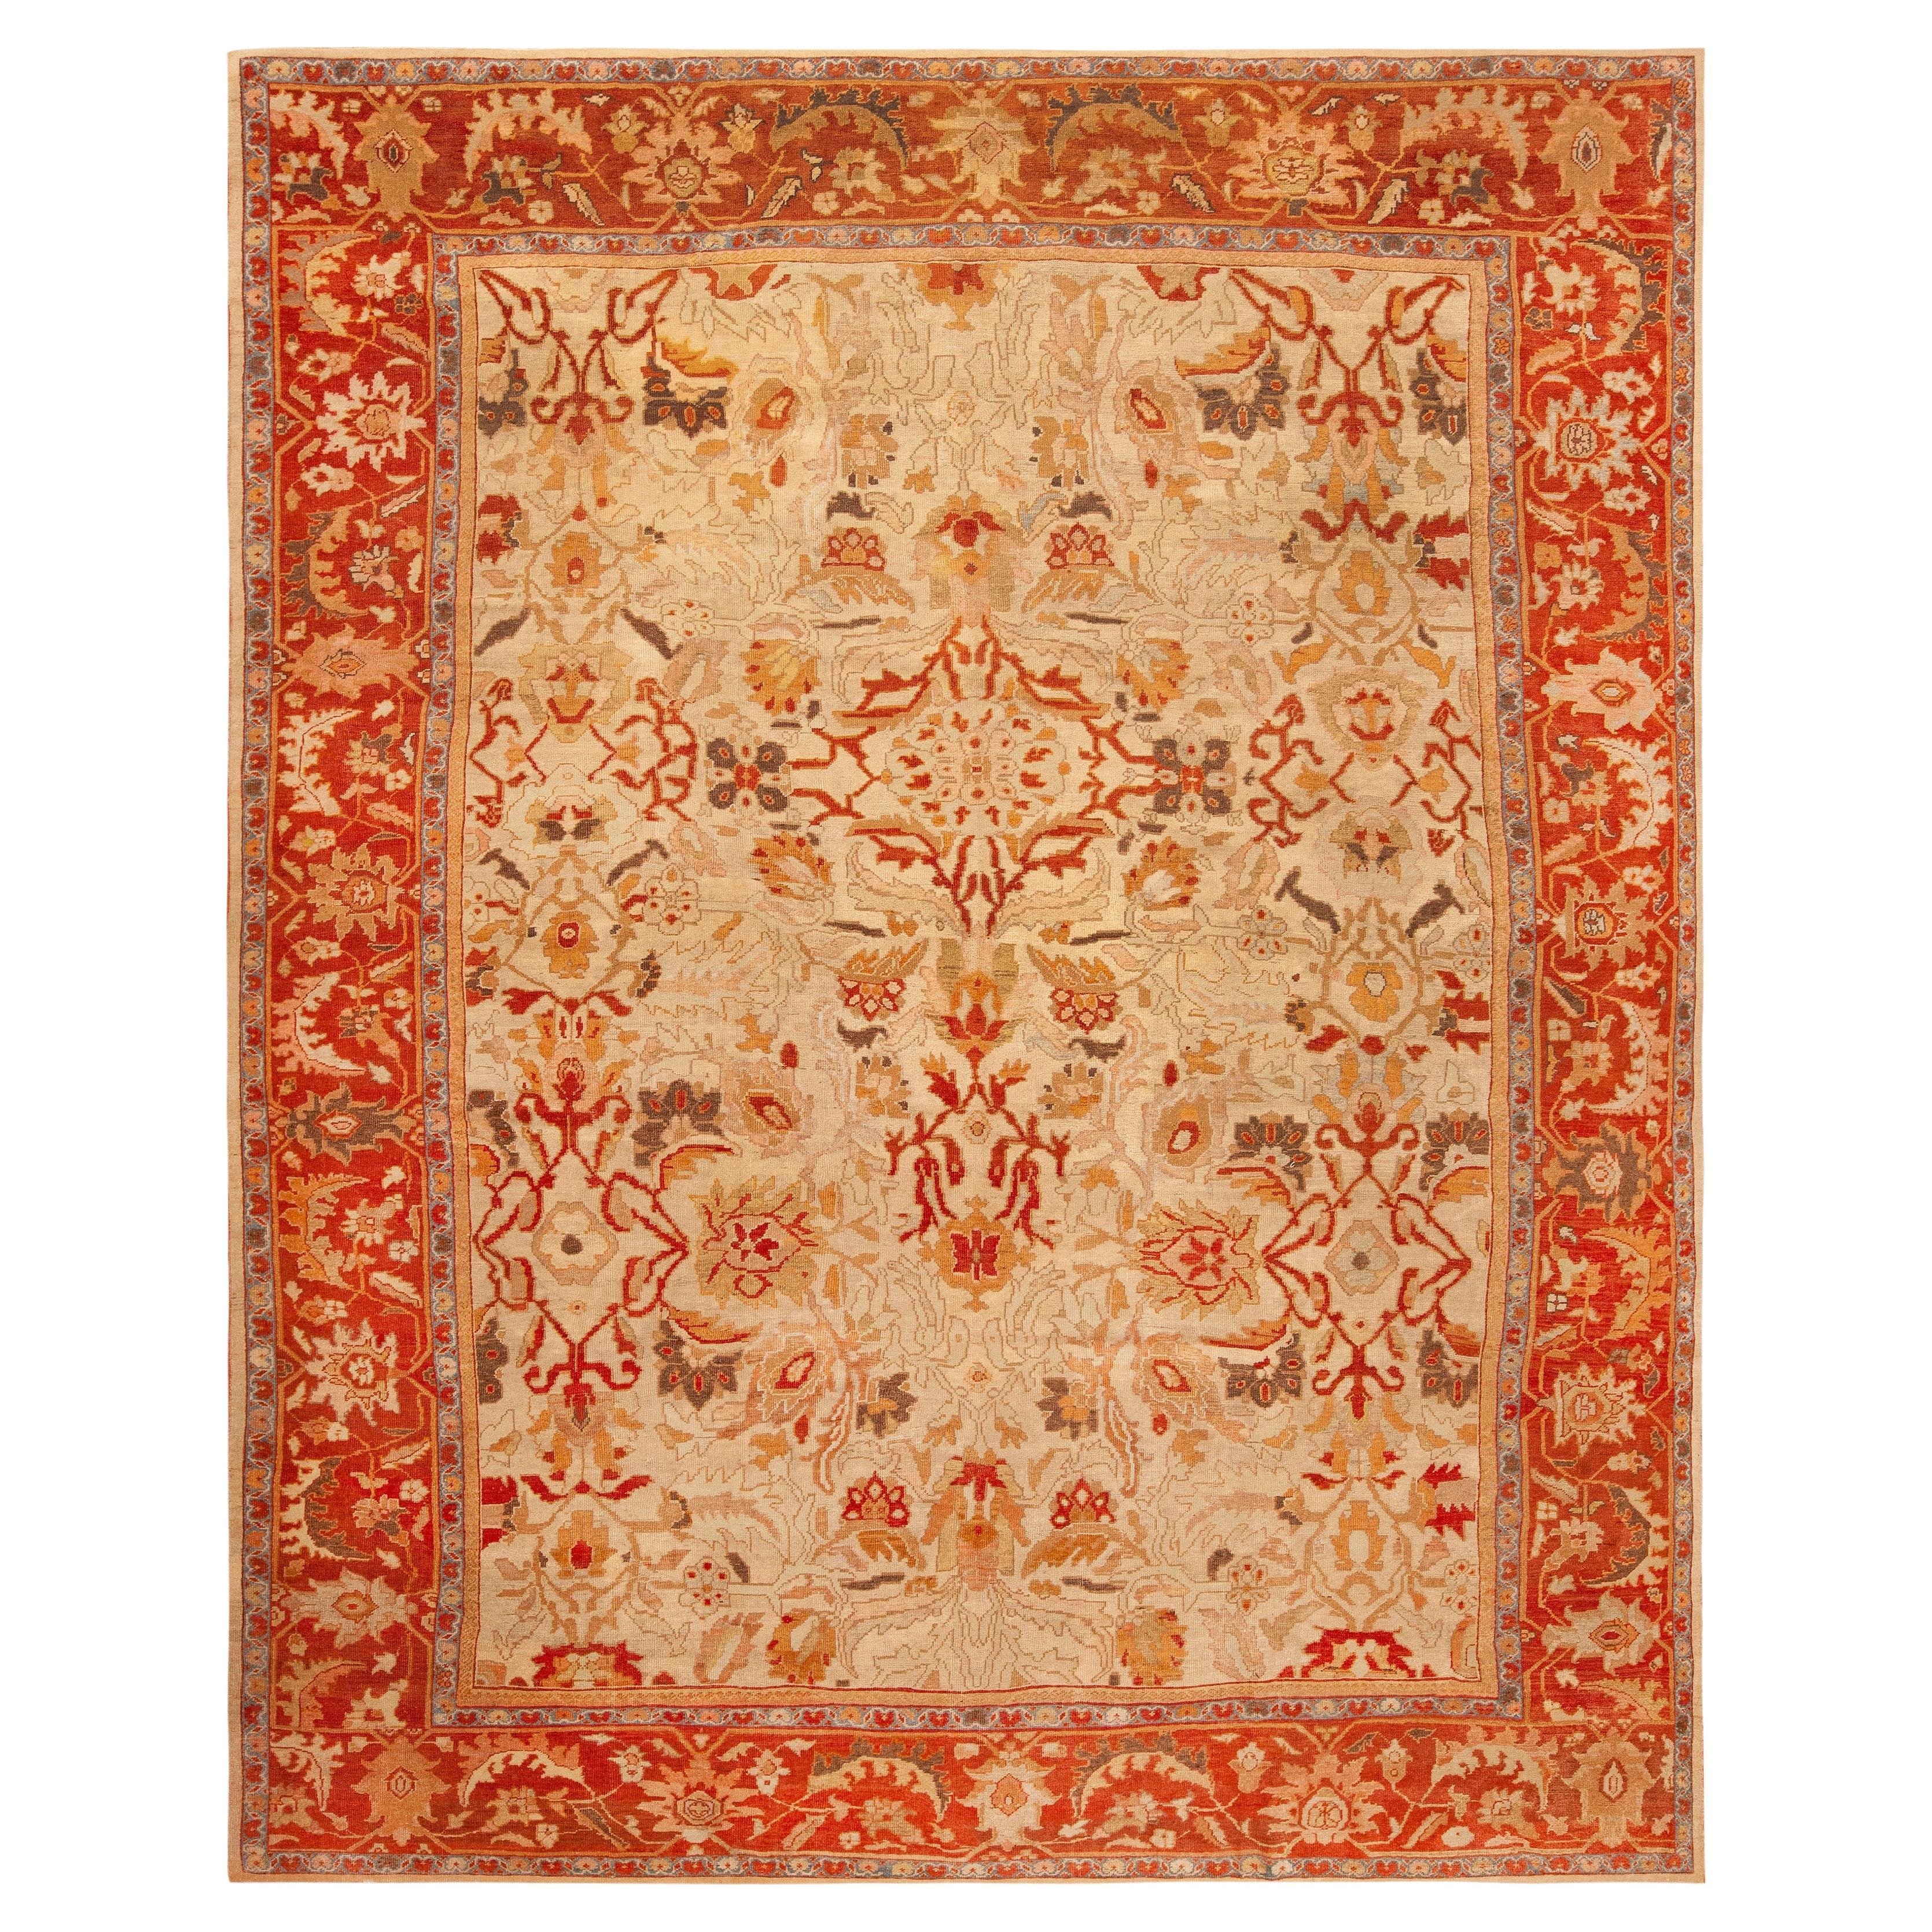 Antique Persian Sultanabad Rug. 11 ft 3 in x 13 ft 7 in